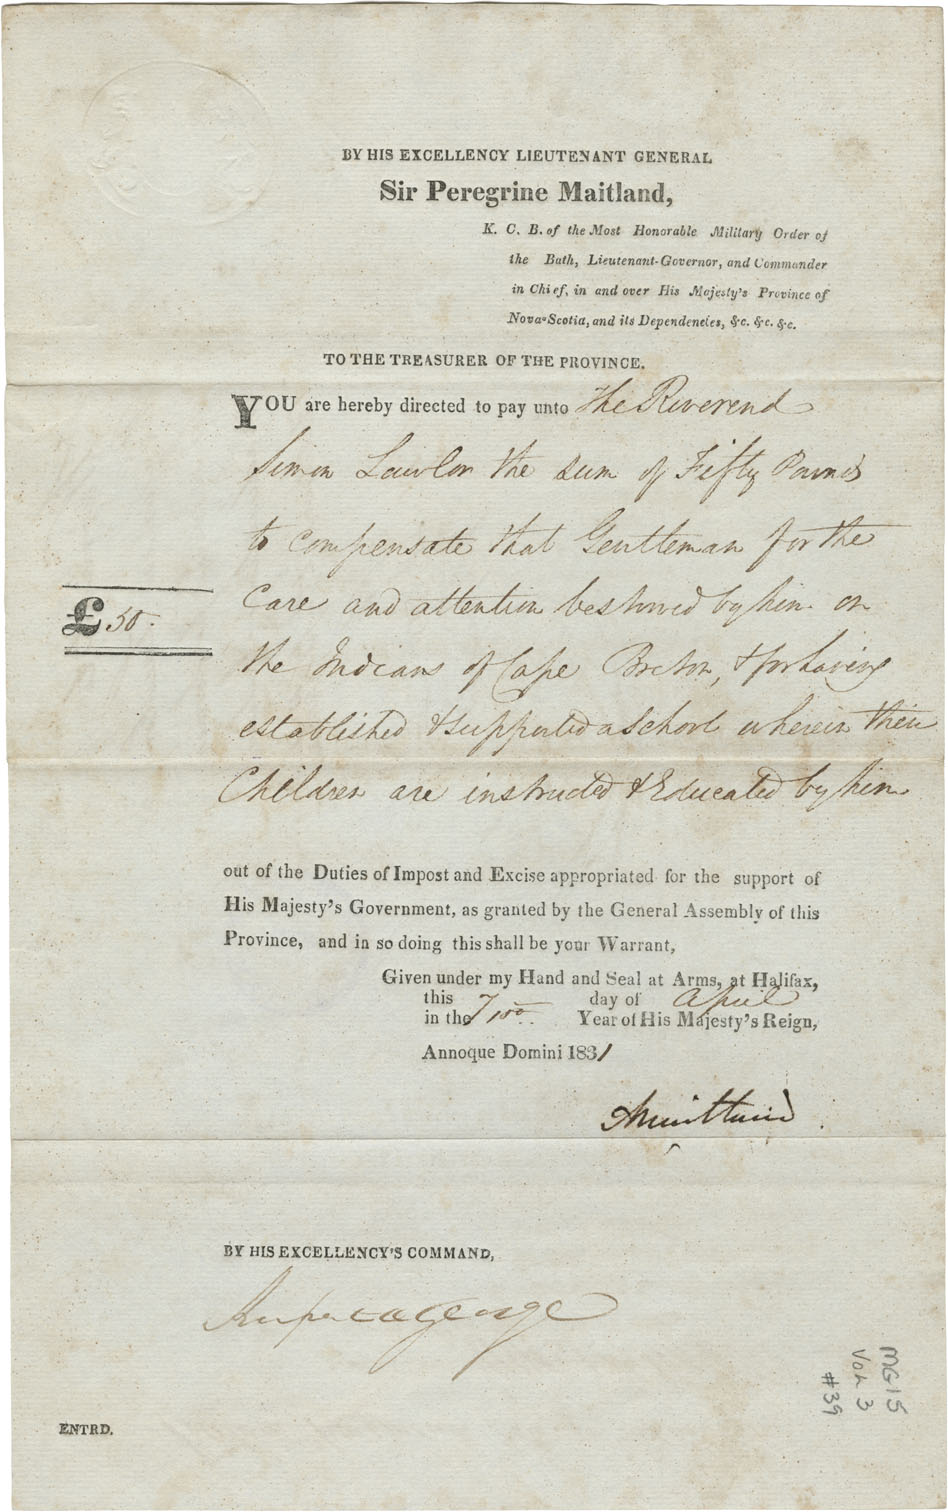 Sir Peregrine Maitland's order to the Provincial Treasurer to pay £50-0-0 to Rev. Simon Lawler for attention to Mi'kmaq and establishing a school for Mi'kmaq in Cape Breton. 